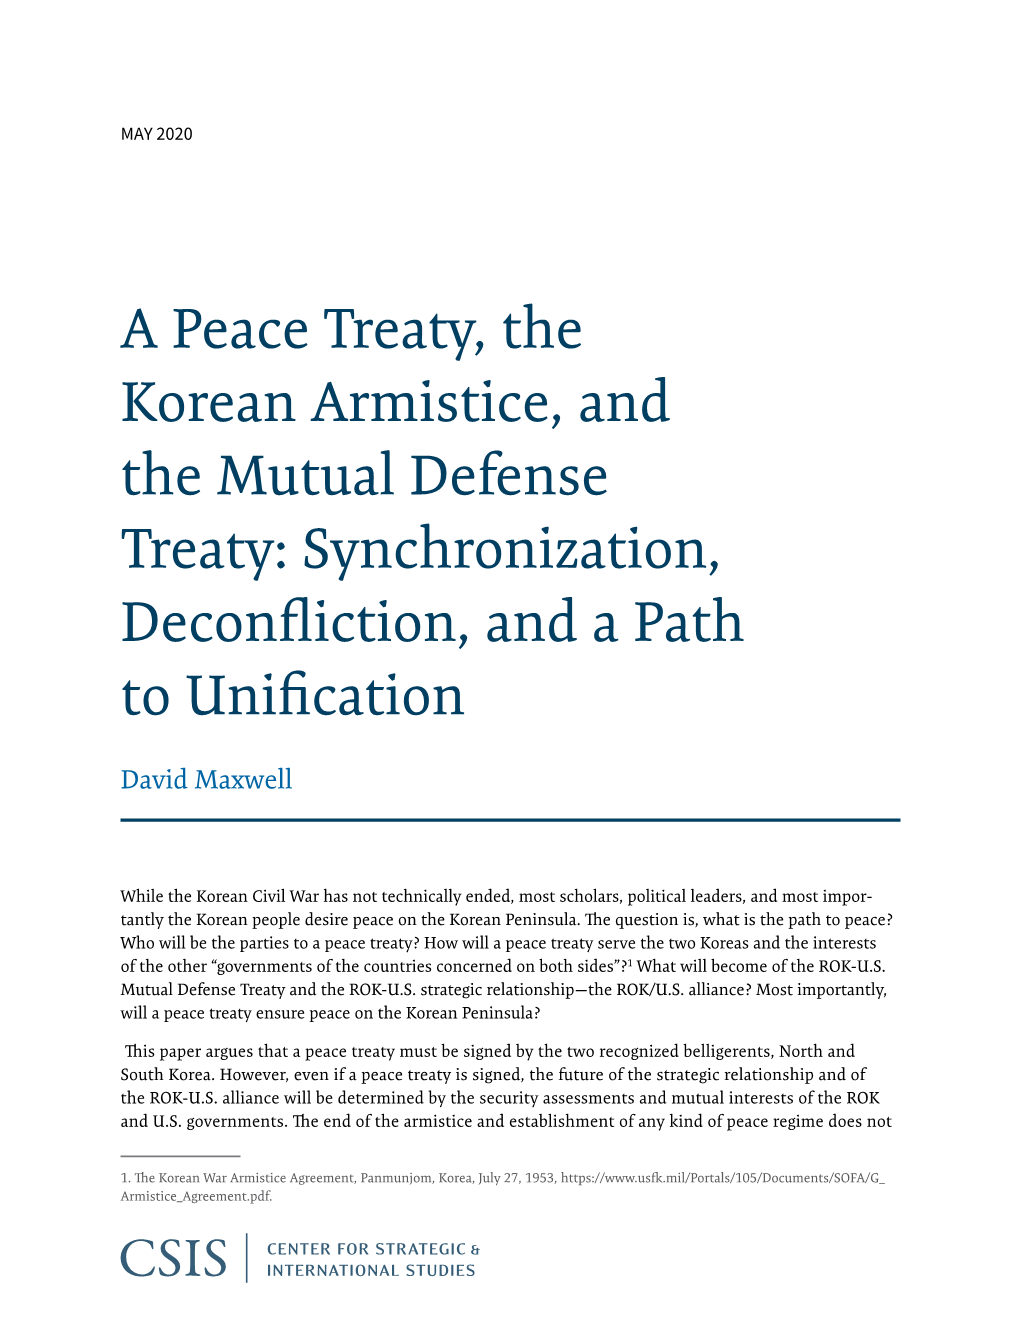 A Peace Treaty, the Korean Armistice, and the Mutual Defense Treaty: Synchronization, Deconfliction, and a Path to Unification